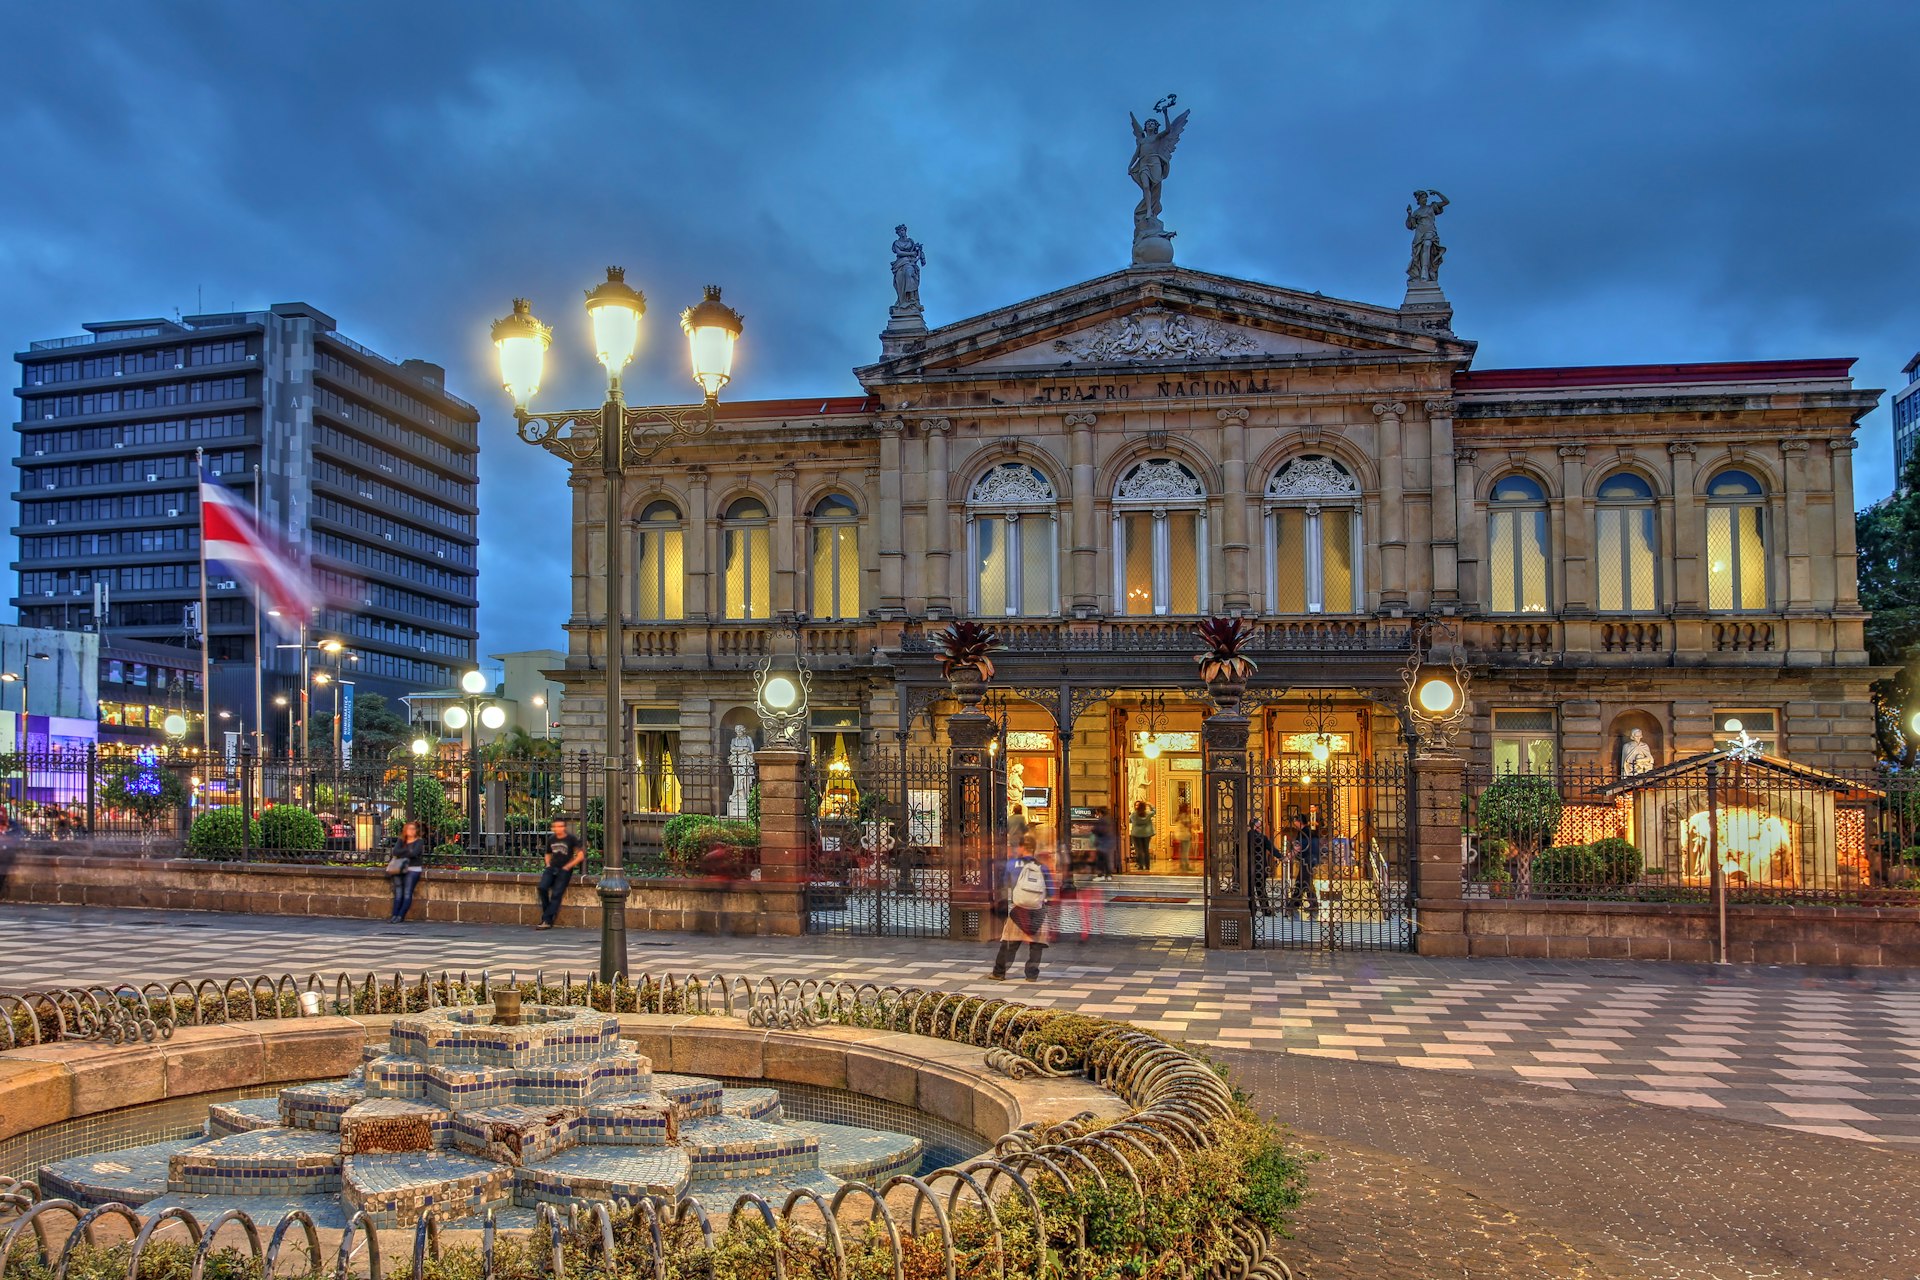 People walking through the square in front of the famous neoclassical National Theater of Costa Rica in San Jose at night.